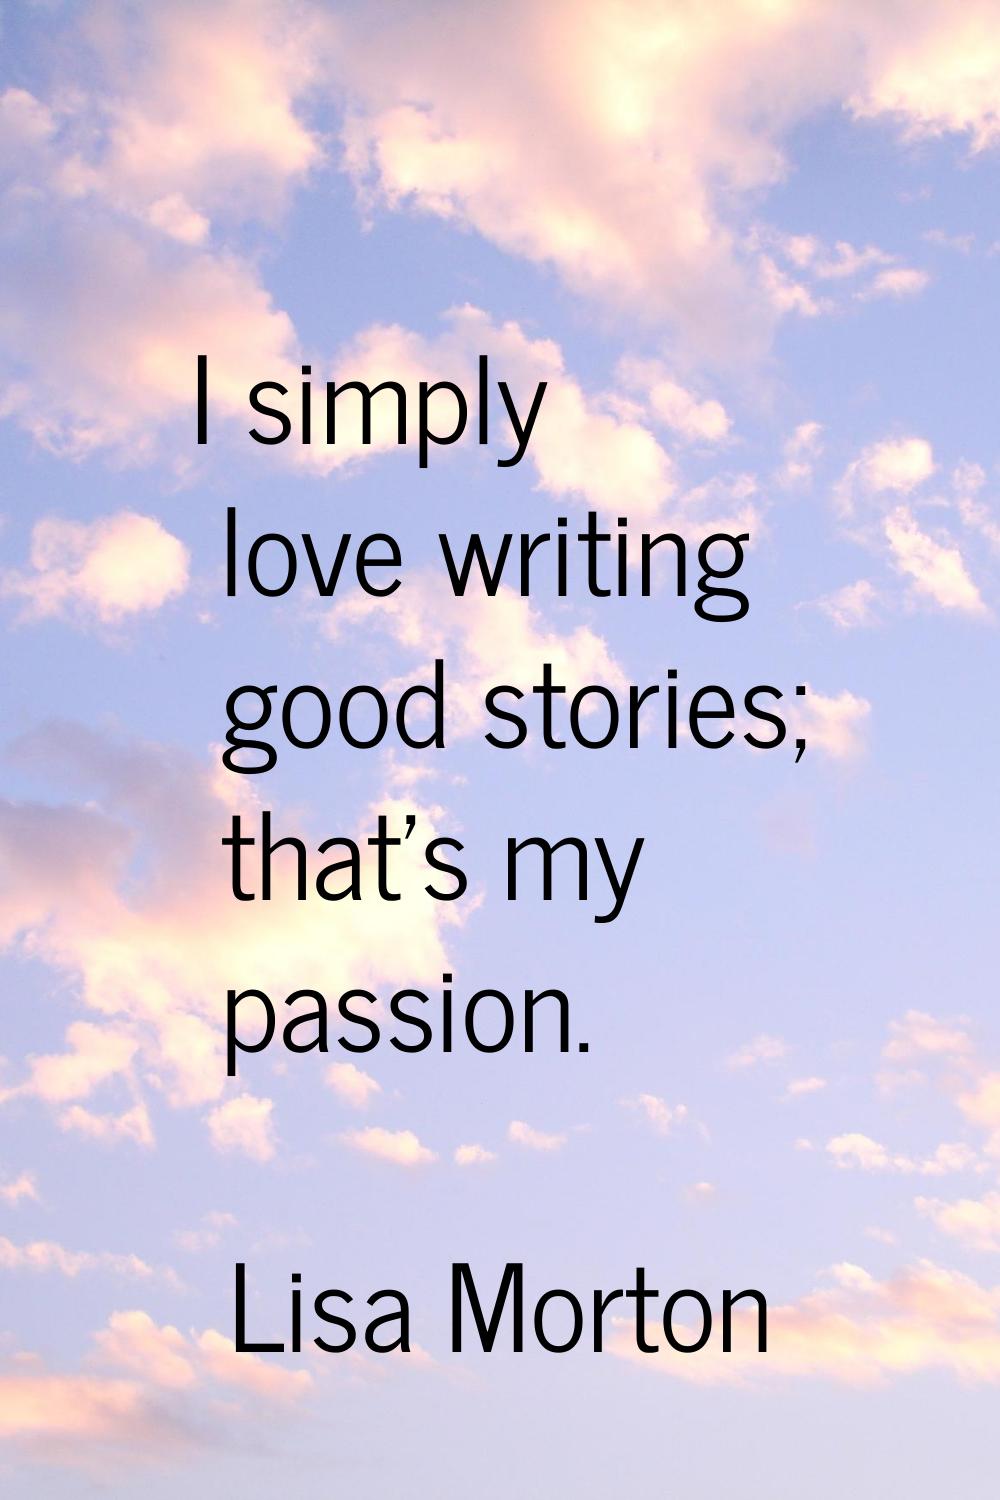 I simply love writing good stories; that's my passion.